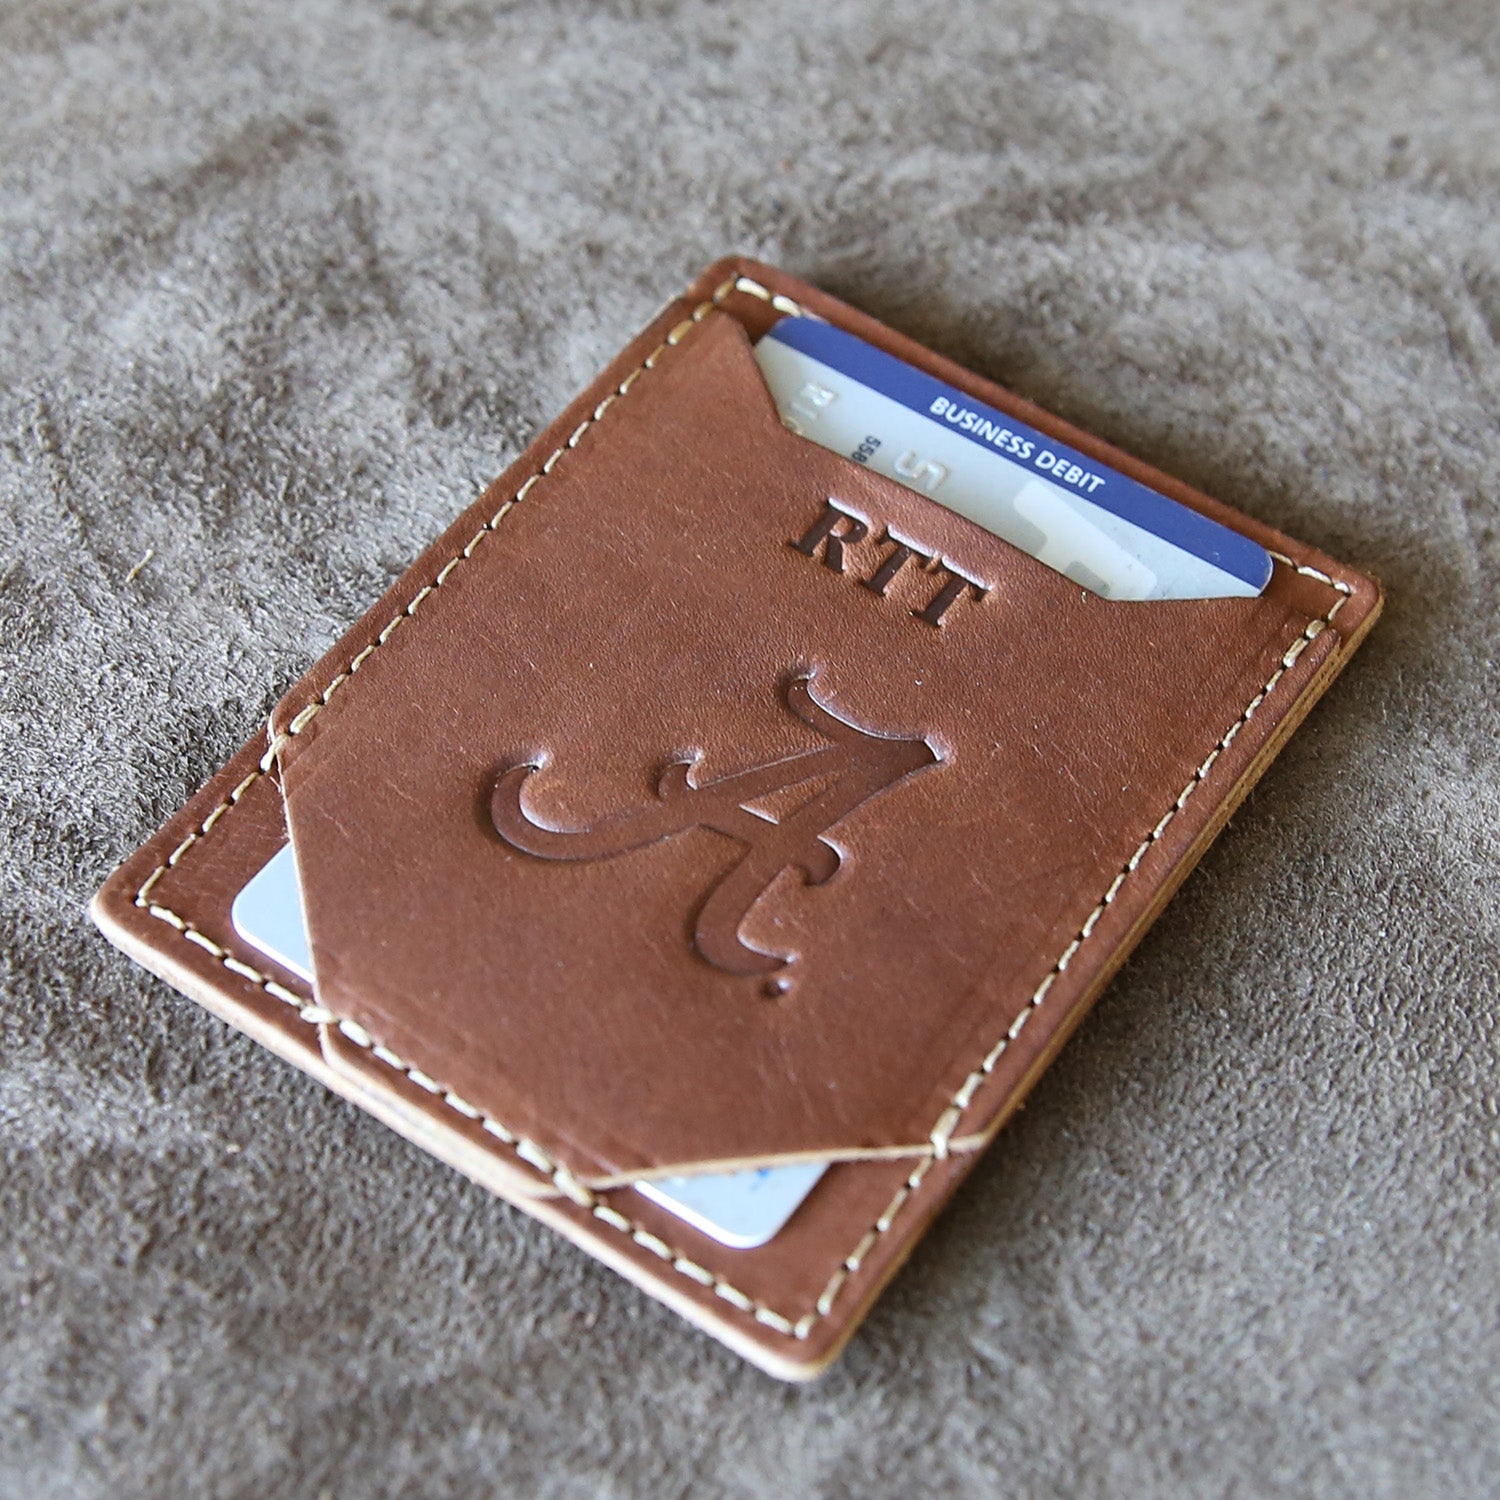 The Officially Licensed Alabama Trey Money Clip Front Pocket Fine